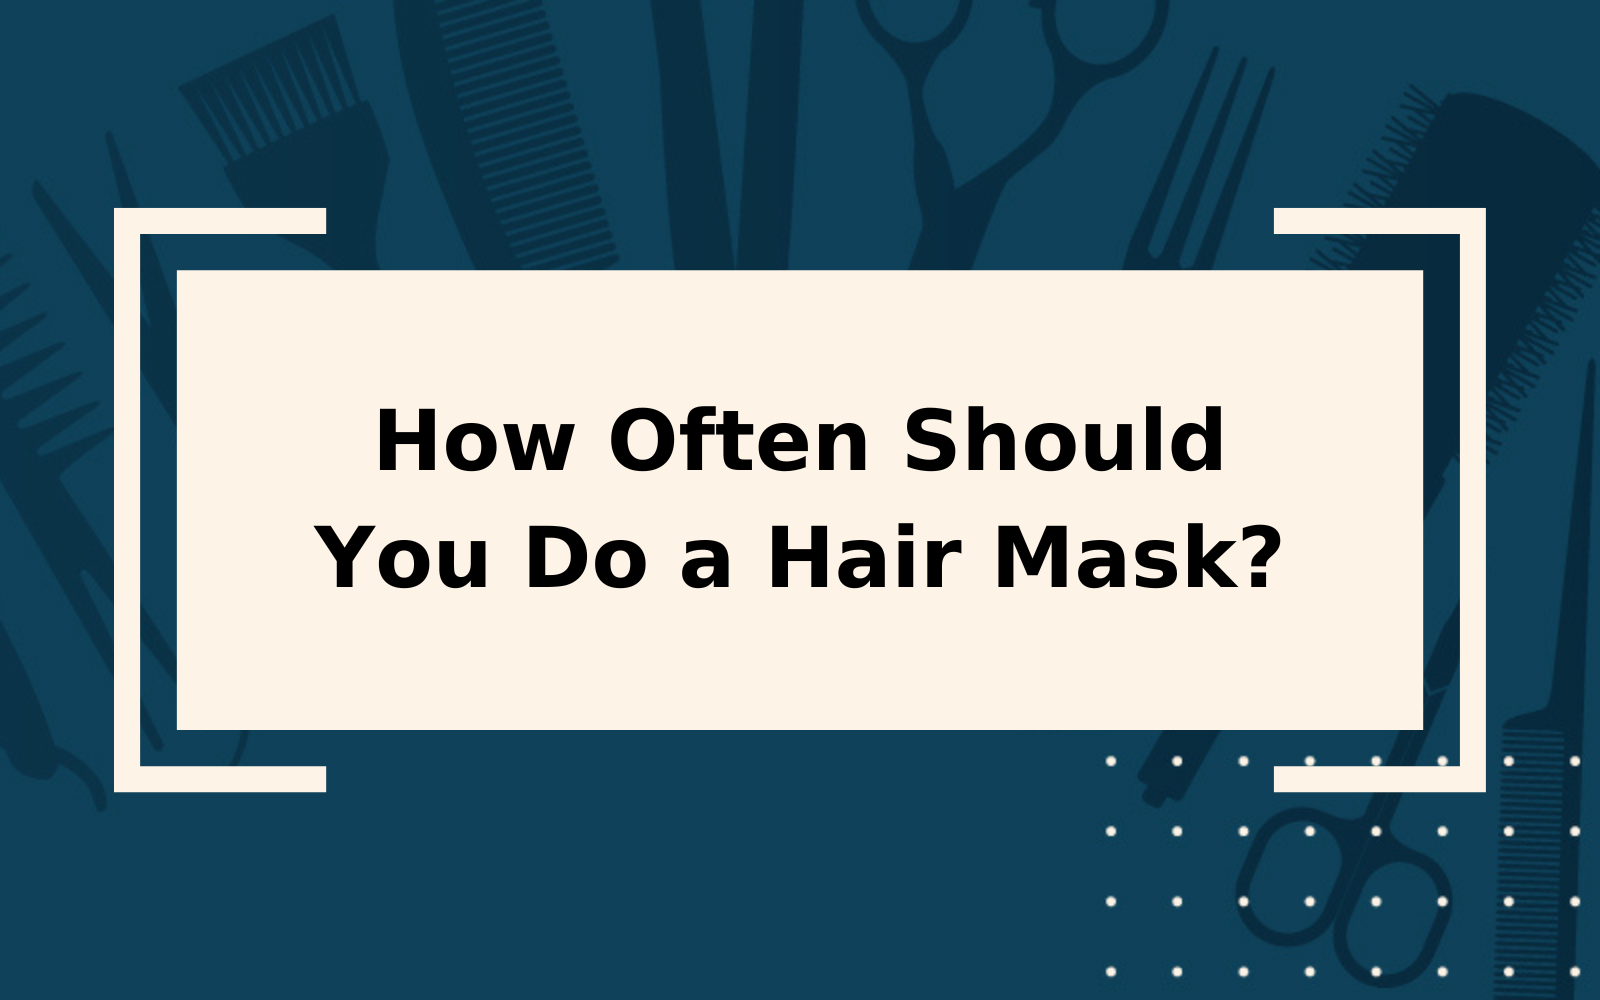 How Often Should You Do a Hair Mask? | Not Too Often!